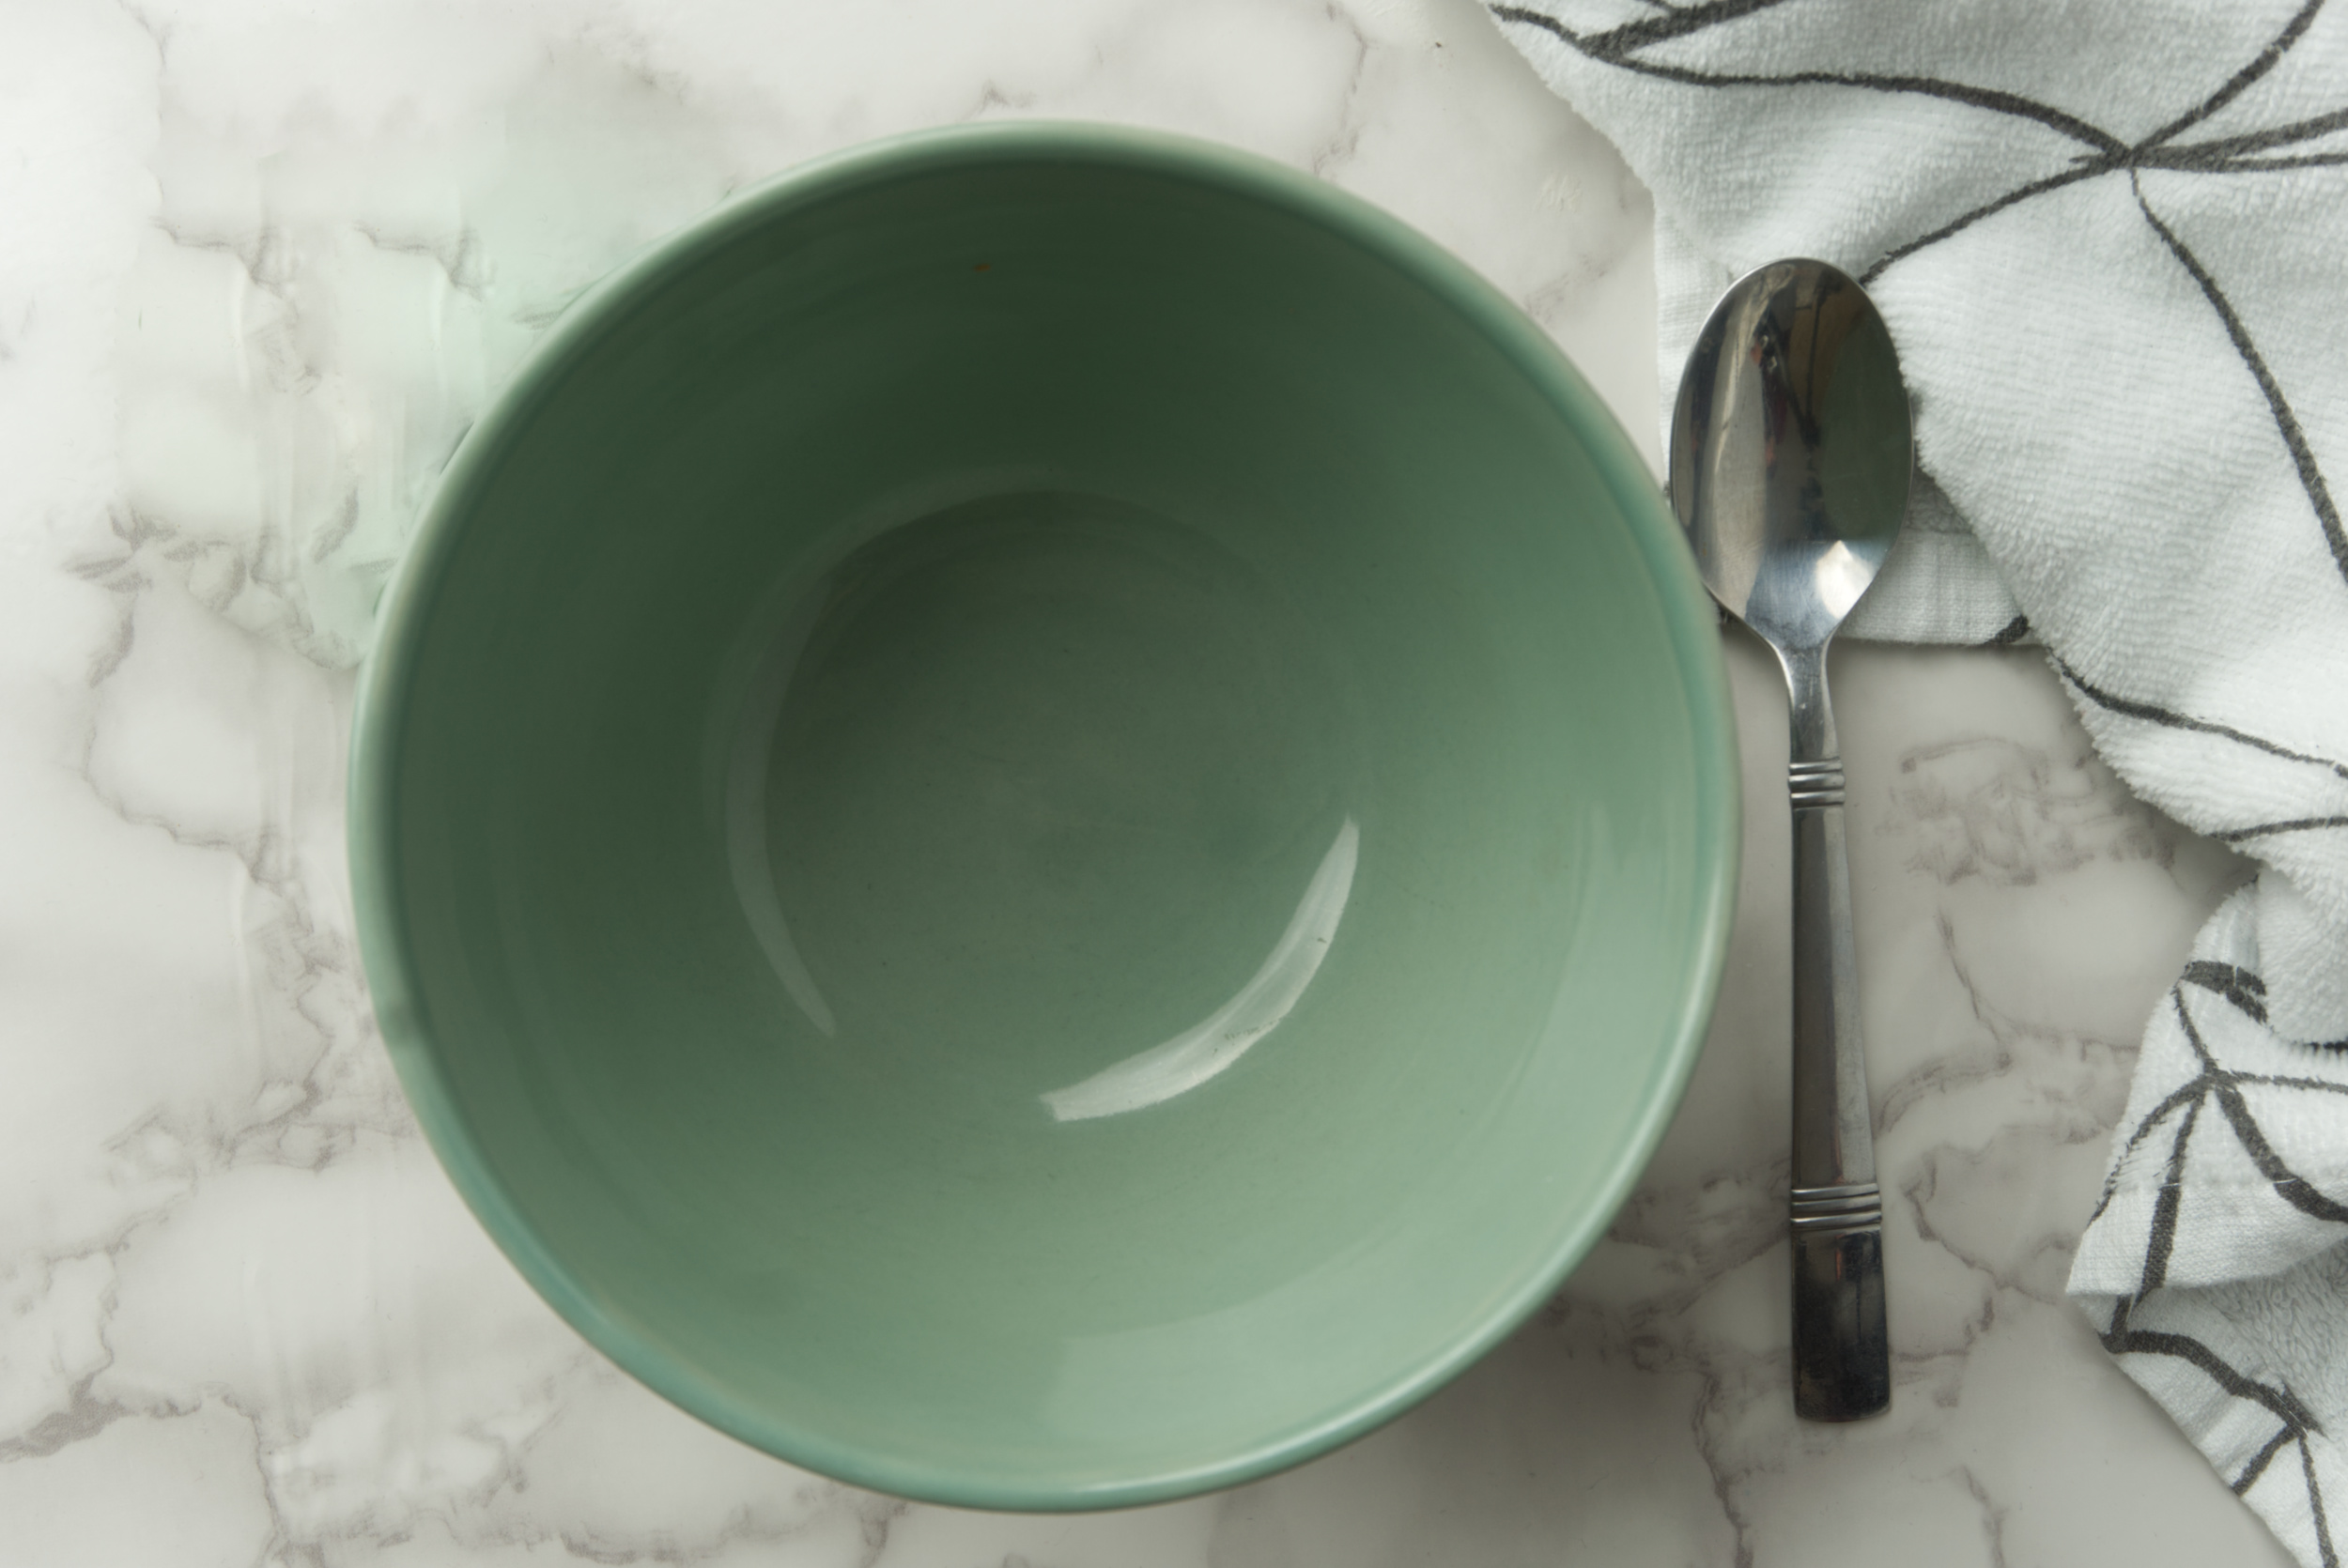 An empty bowl centered in the middle of the image with a spoon on the right